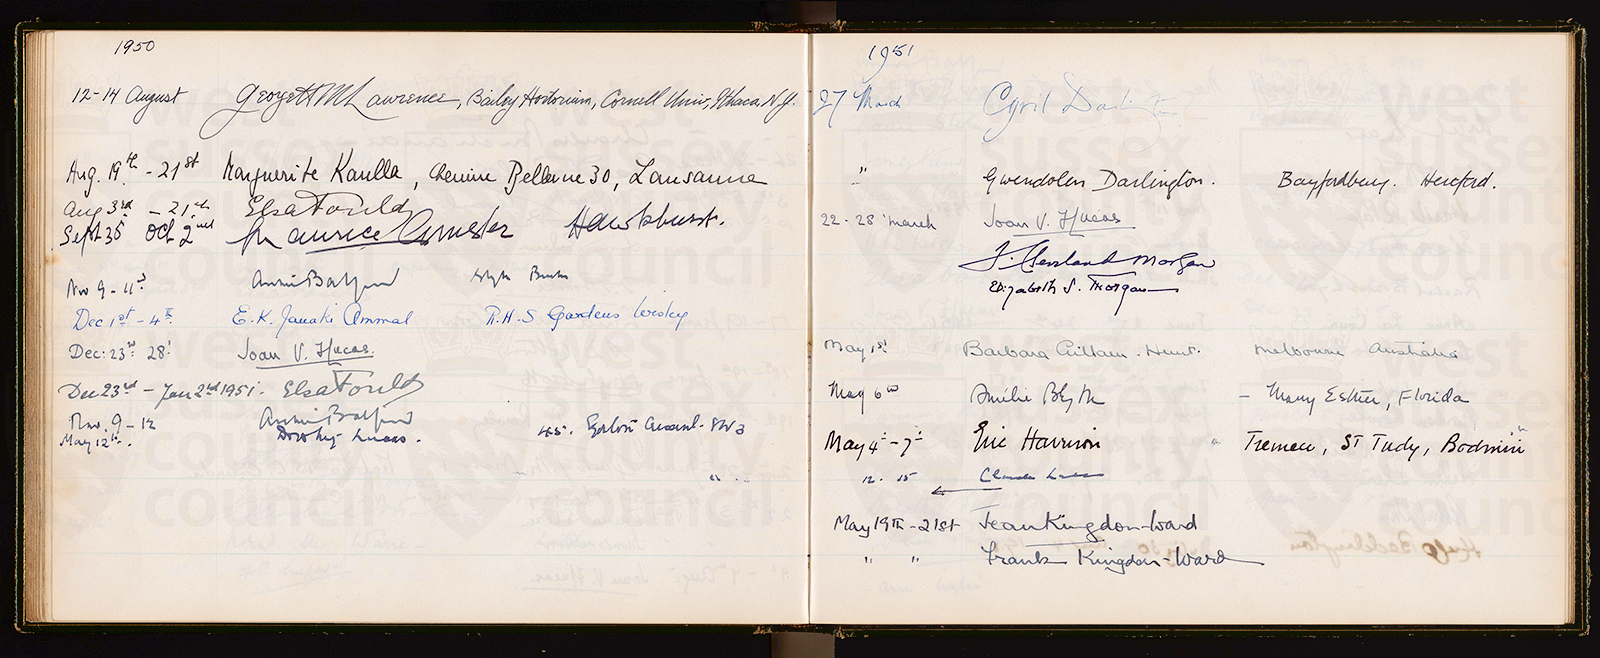 Last Plant Hunters. Bottom right Frank and Jean Kingdon-Ward 1 to 21 May, 1951. Other signatures international botanists, scientists and relatives.